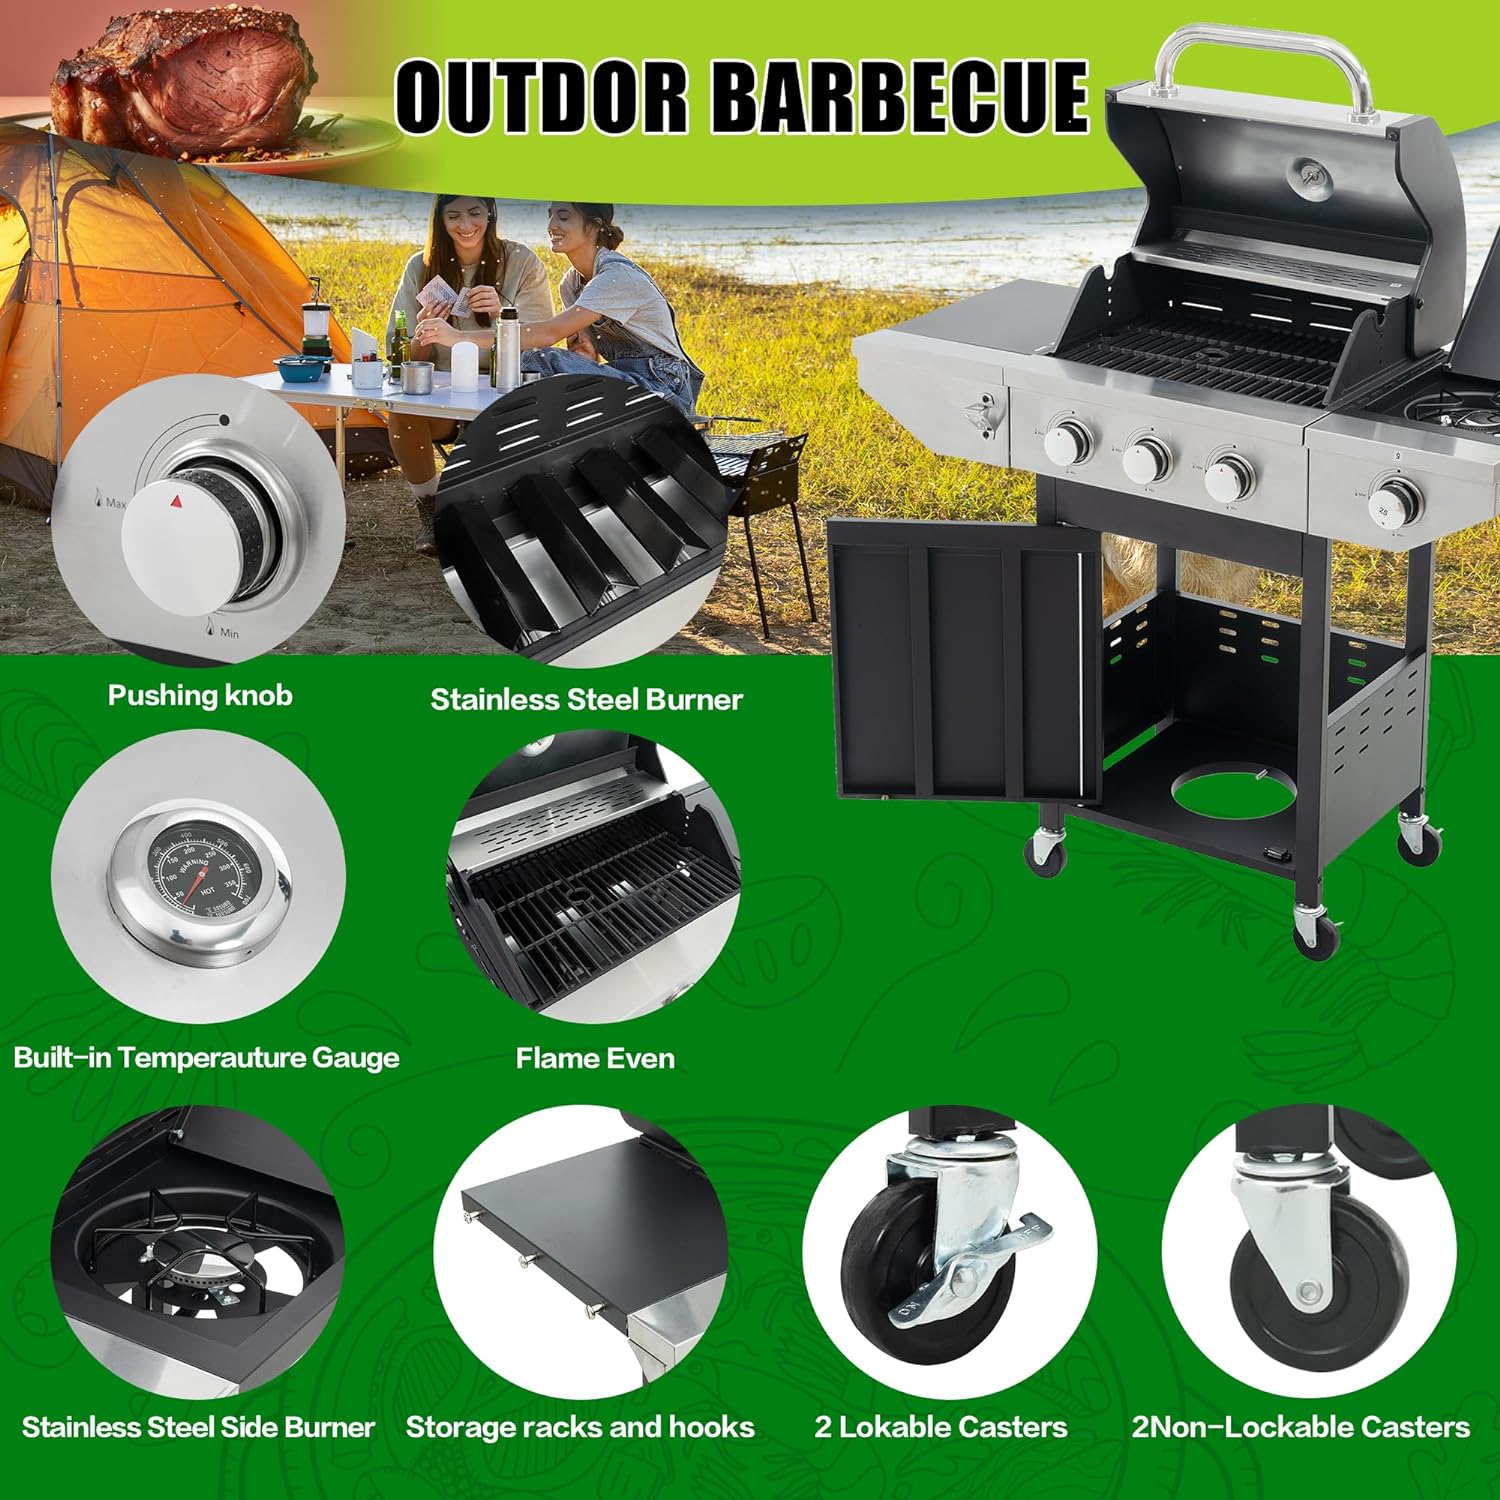 3-Burners Propane Gas Grill with Side Burner  Thermometer, 33950 BTU Output Stainless Steel Grill for Outdoor BBQ and Camping, Patio Backyard Barbecue(3 Burner+Side Burner)